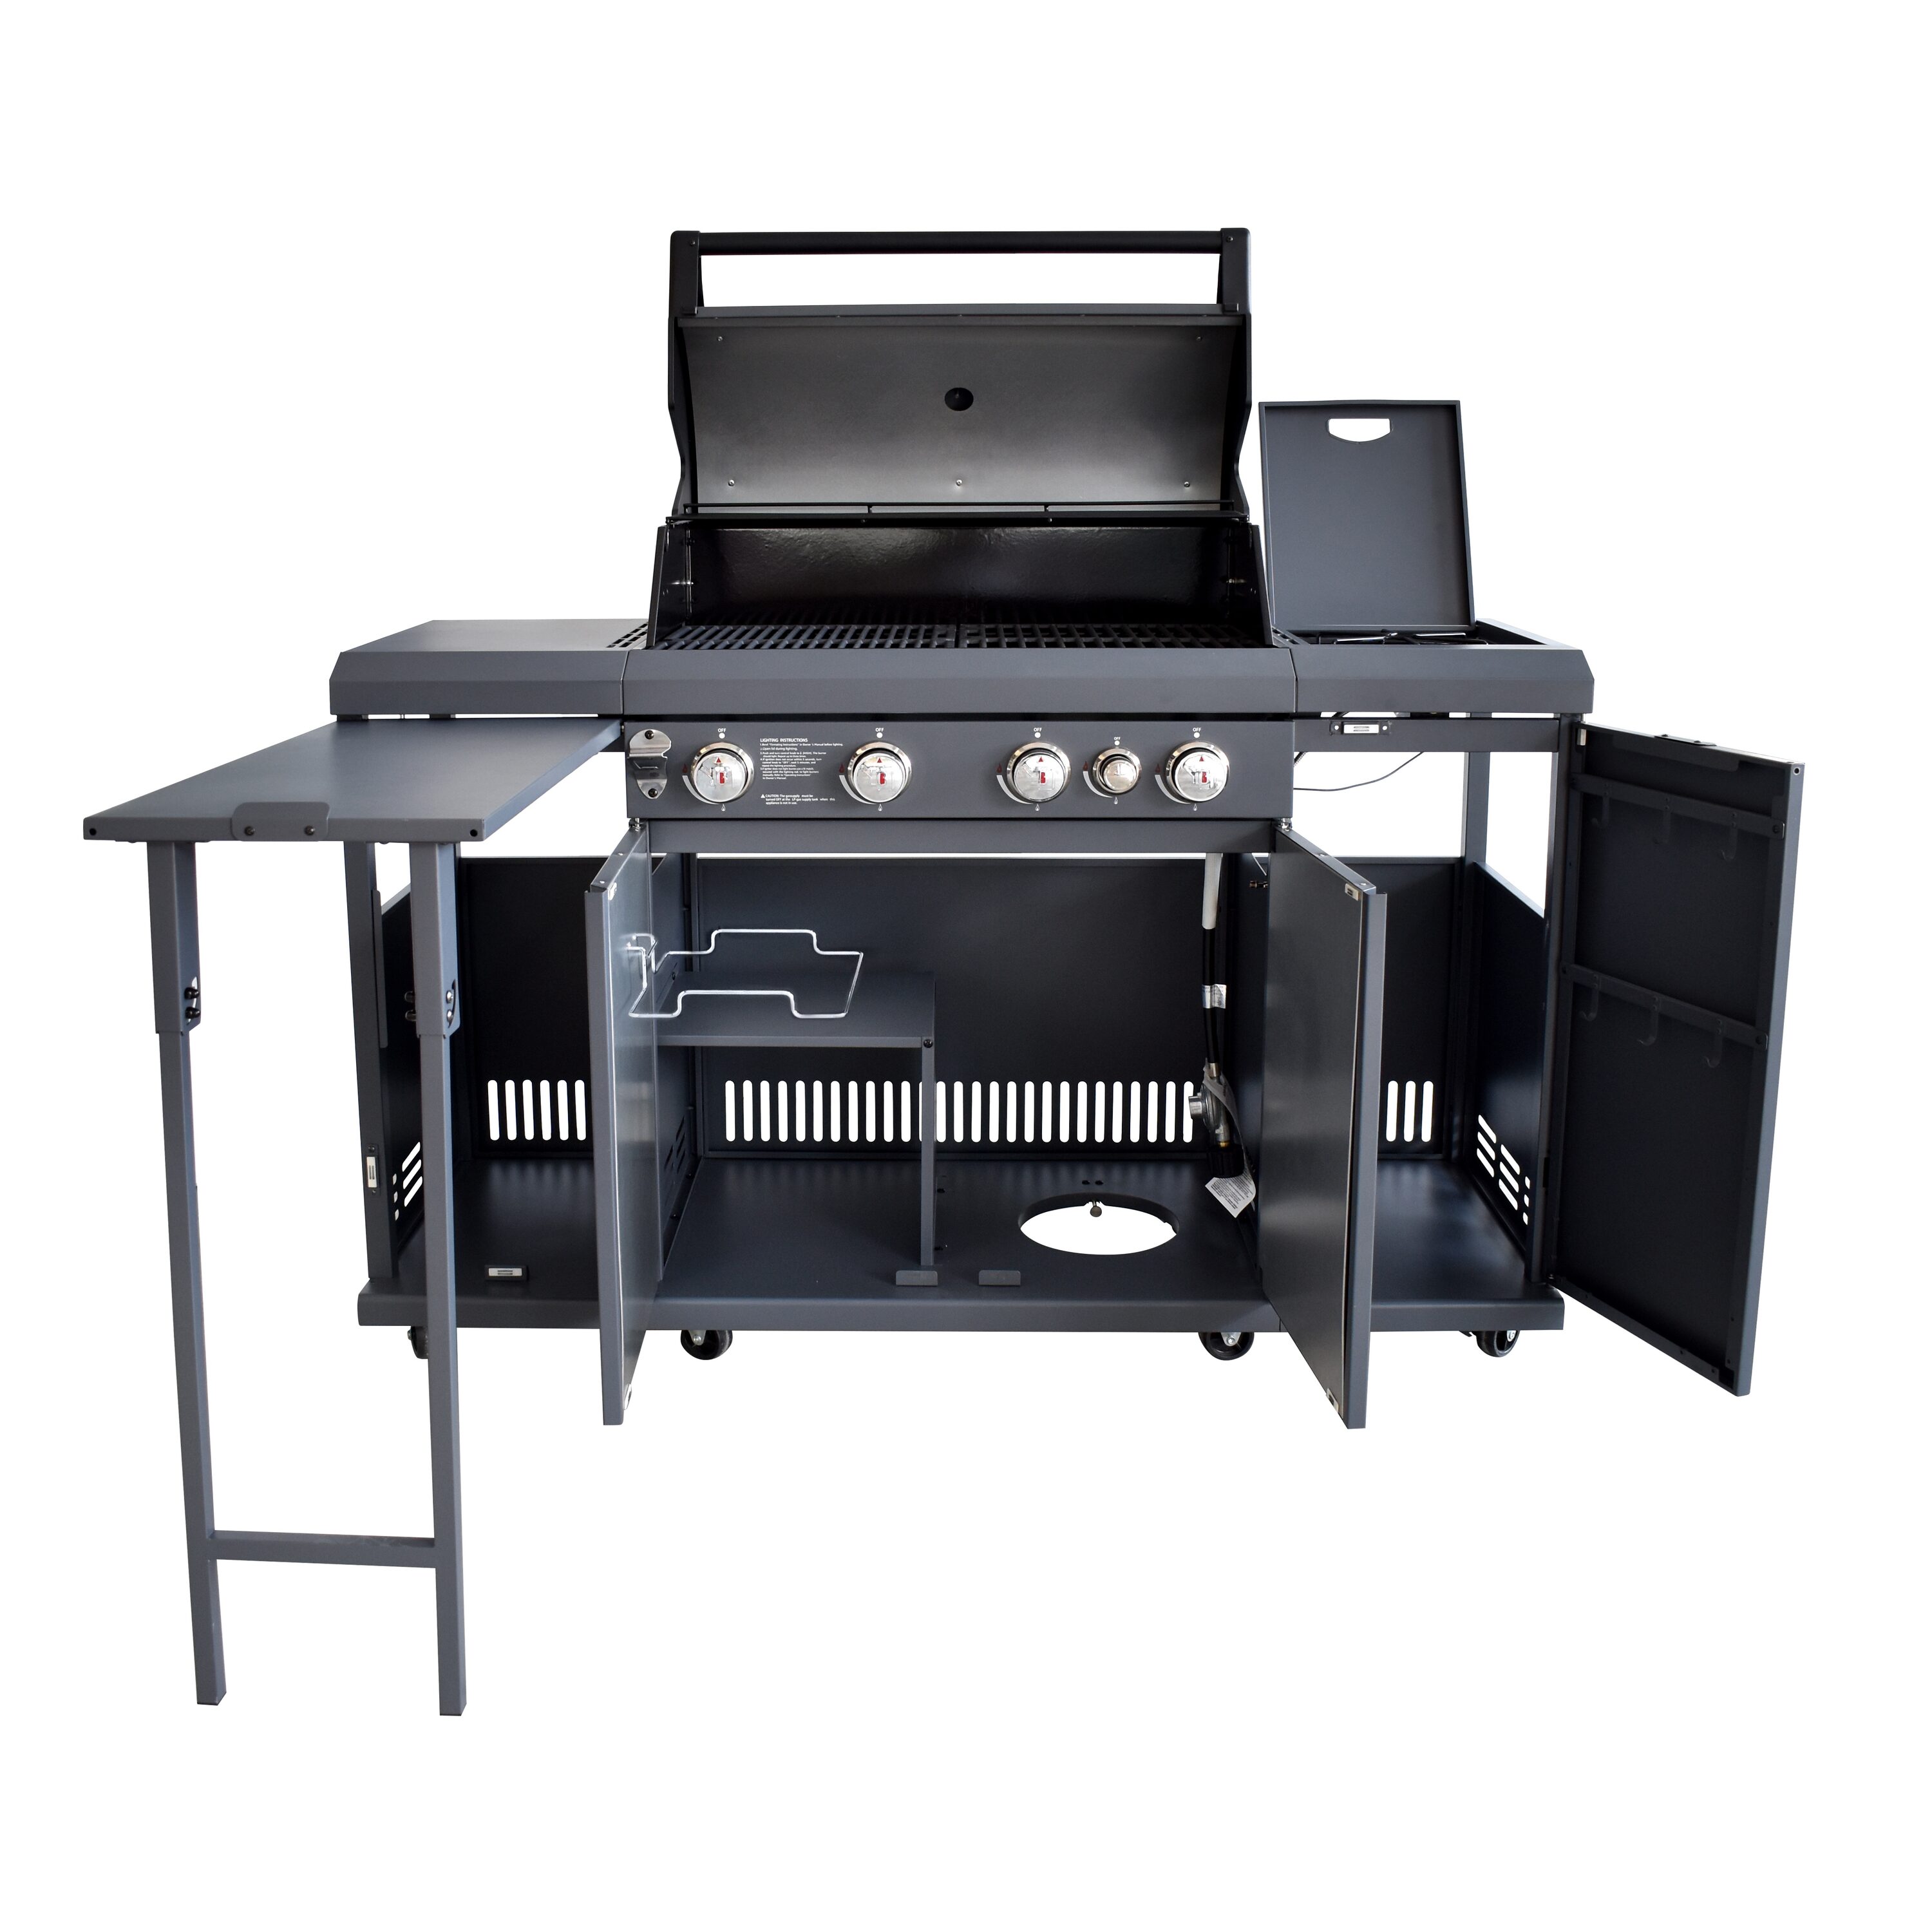 Brand-Man Grills Rustler2 Gray 4-Burner Liquid Propane and Natural Gas Grill  with 1 Side Burner in the Gas Grills department at